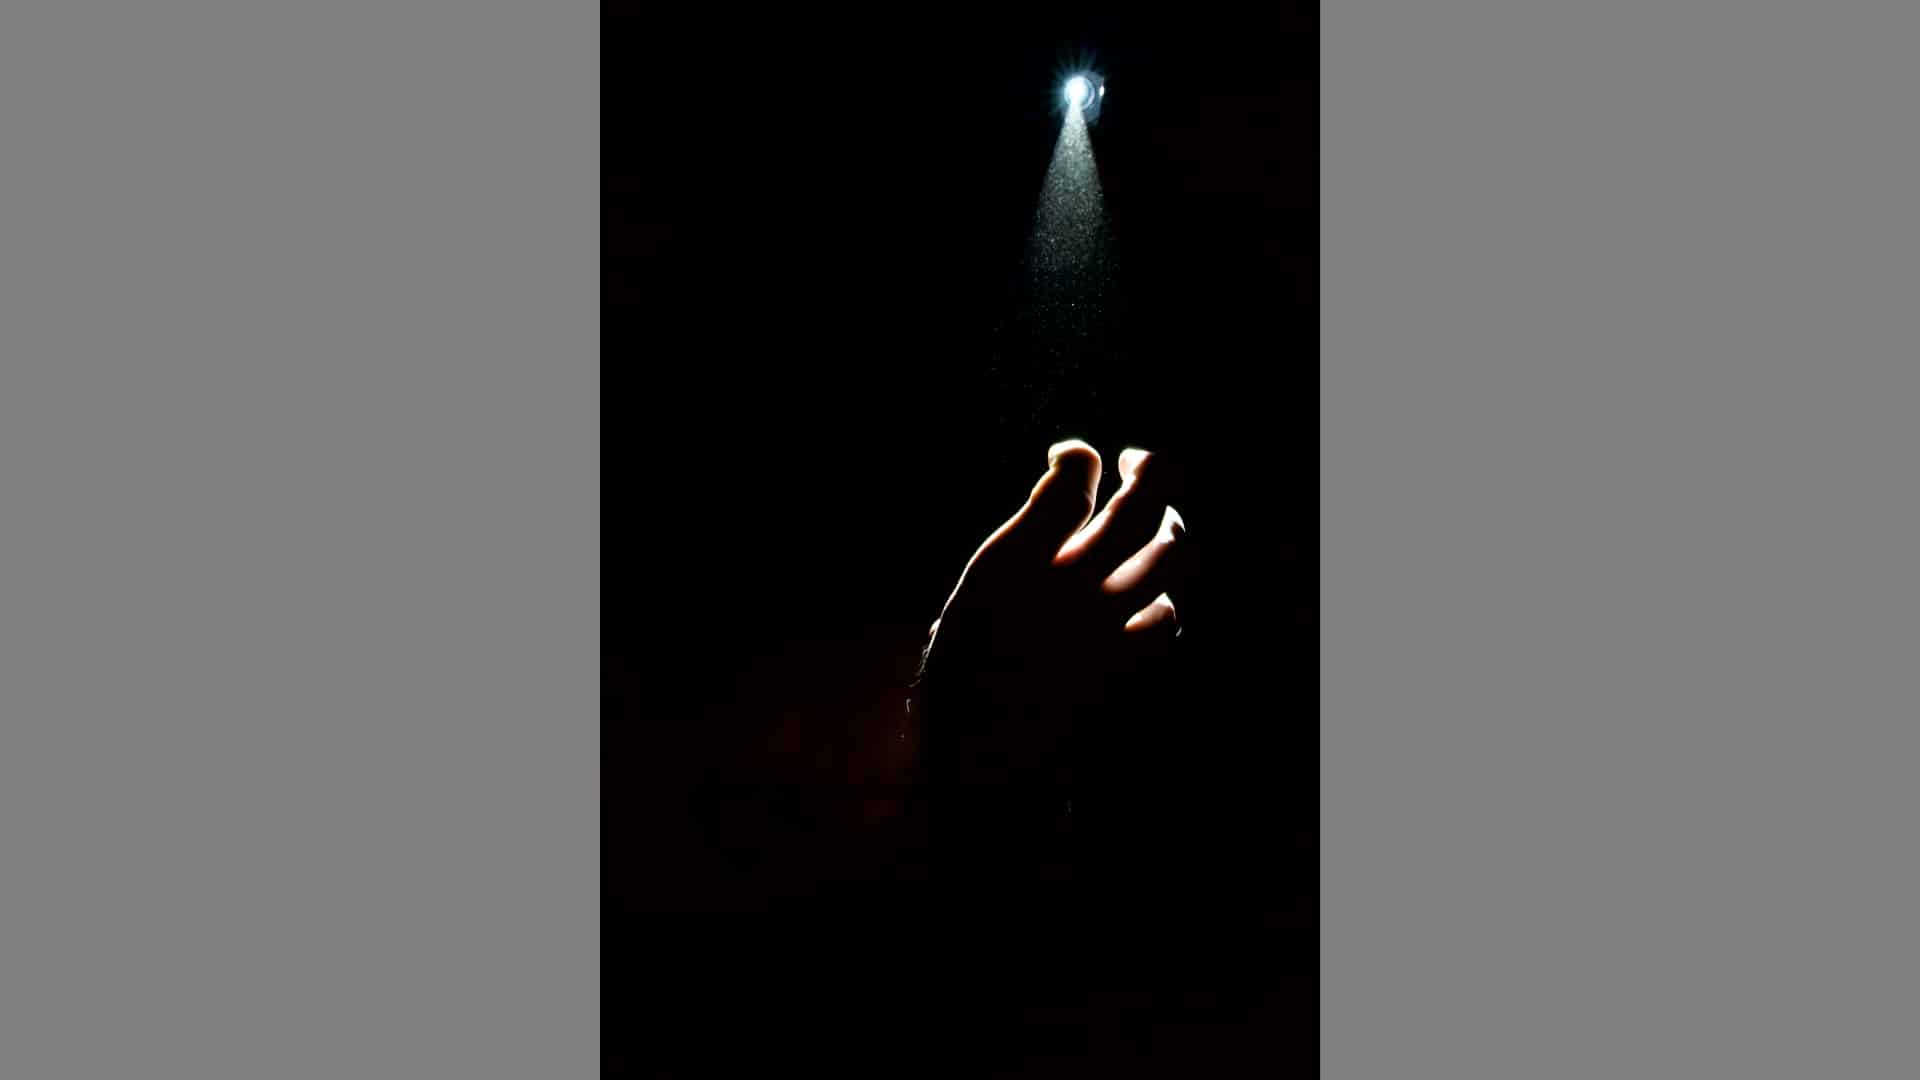 A hand reaches out of the darkness towards a light